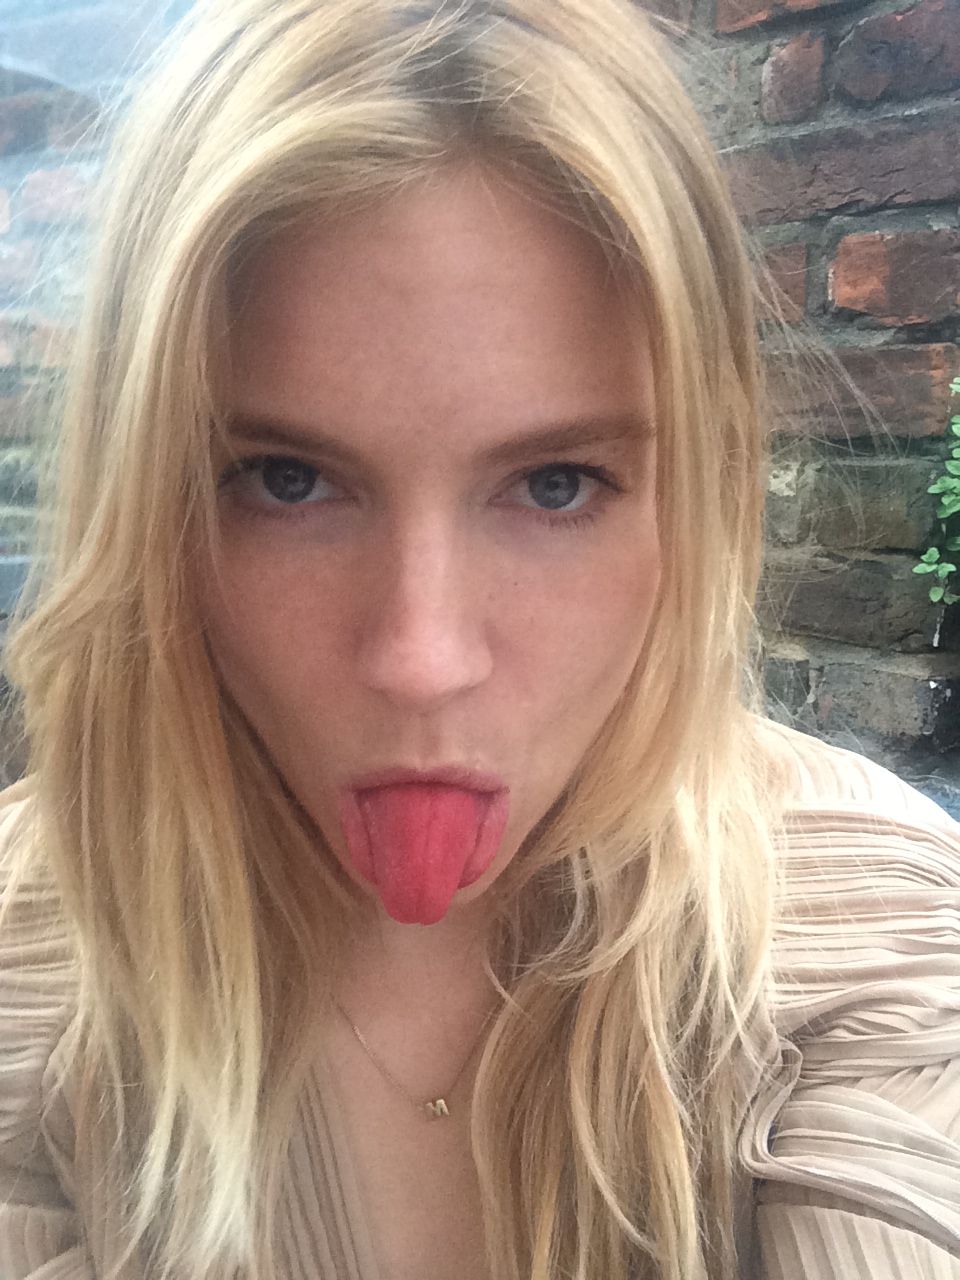 Sienna Miller taking a selfie with her tongue sticking out